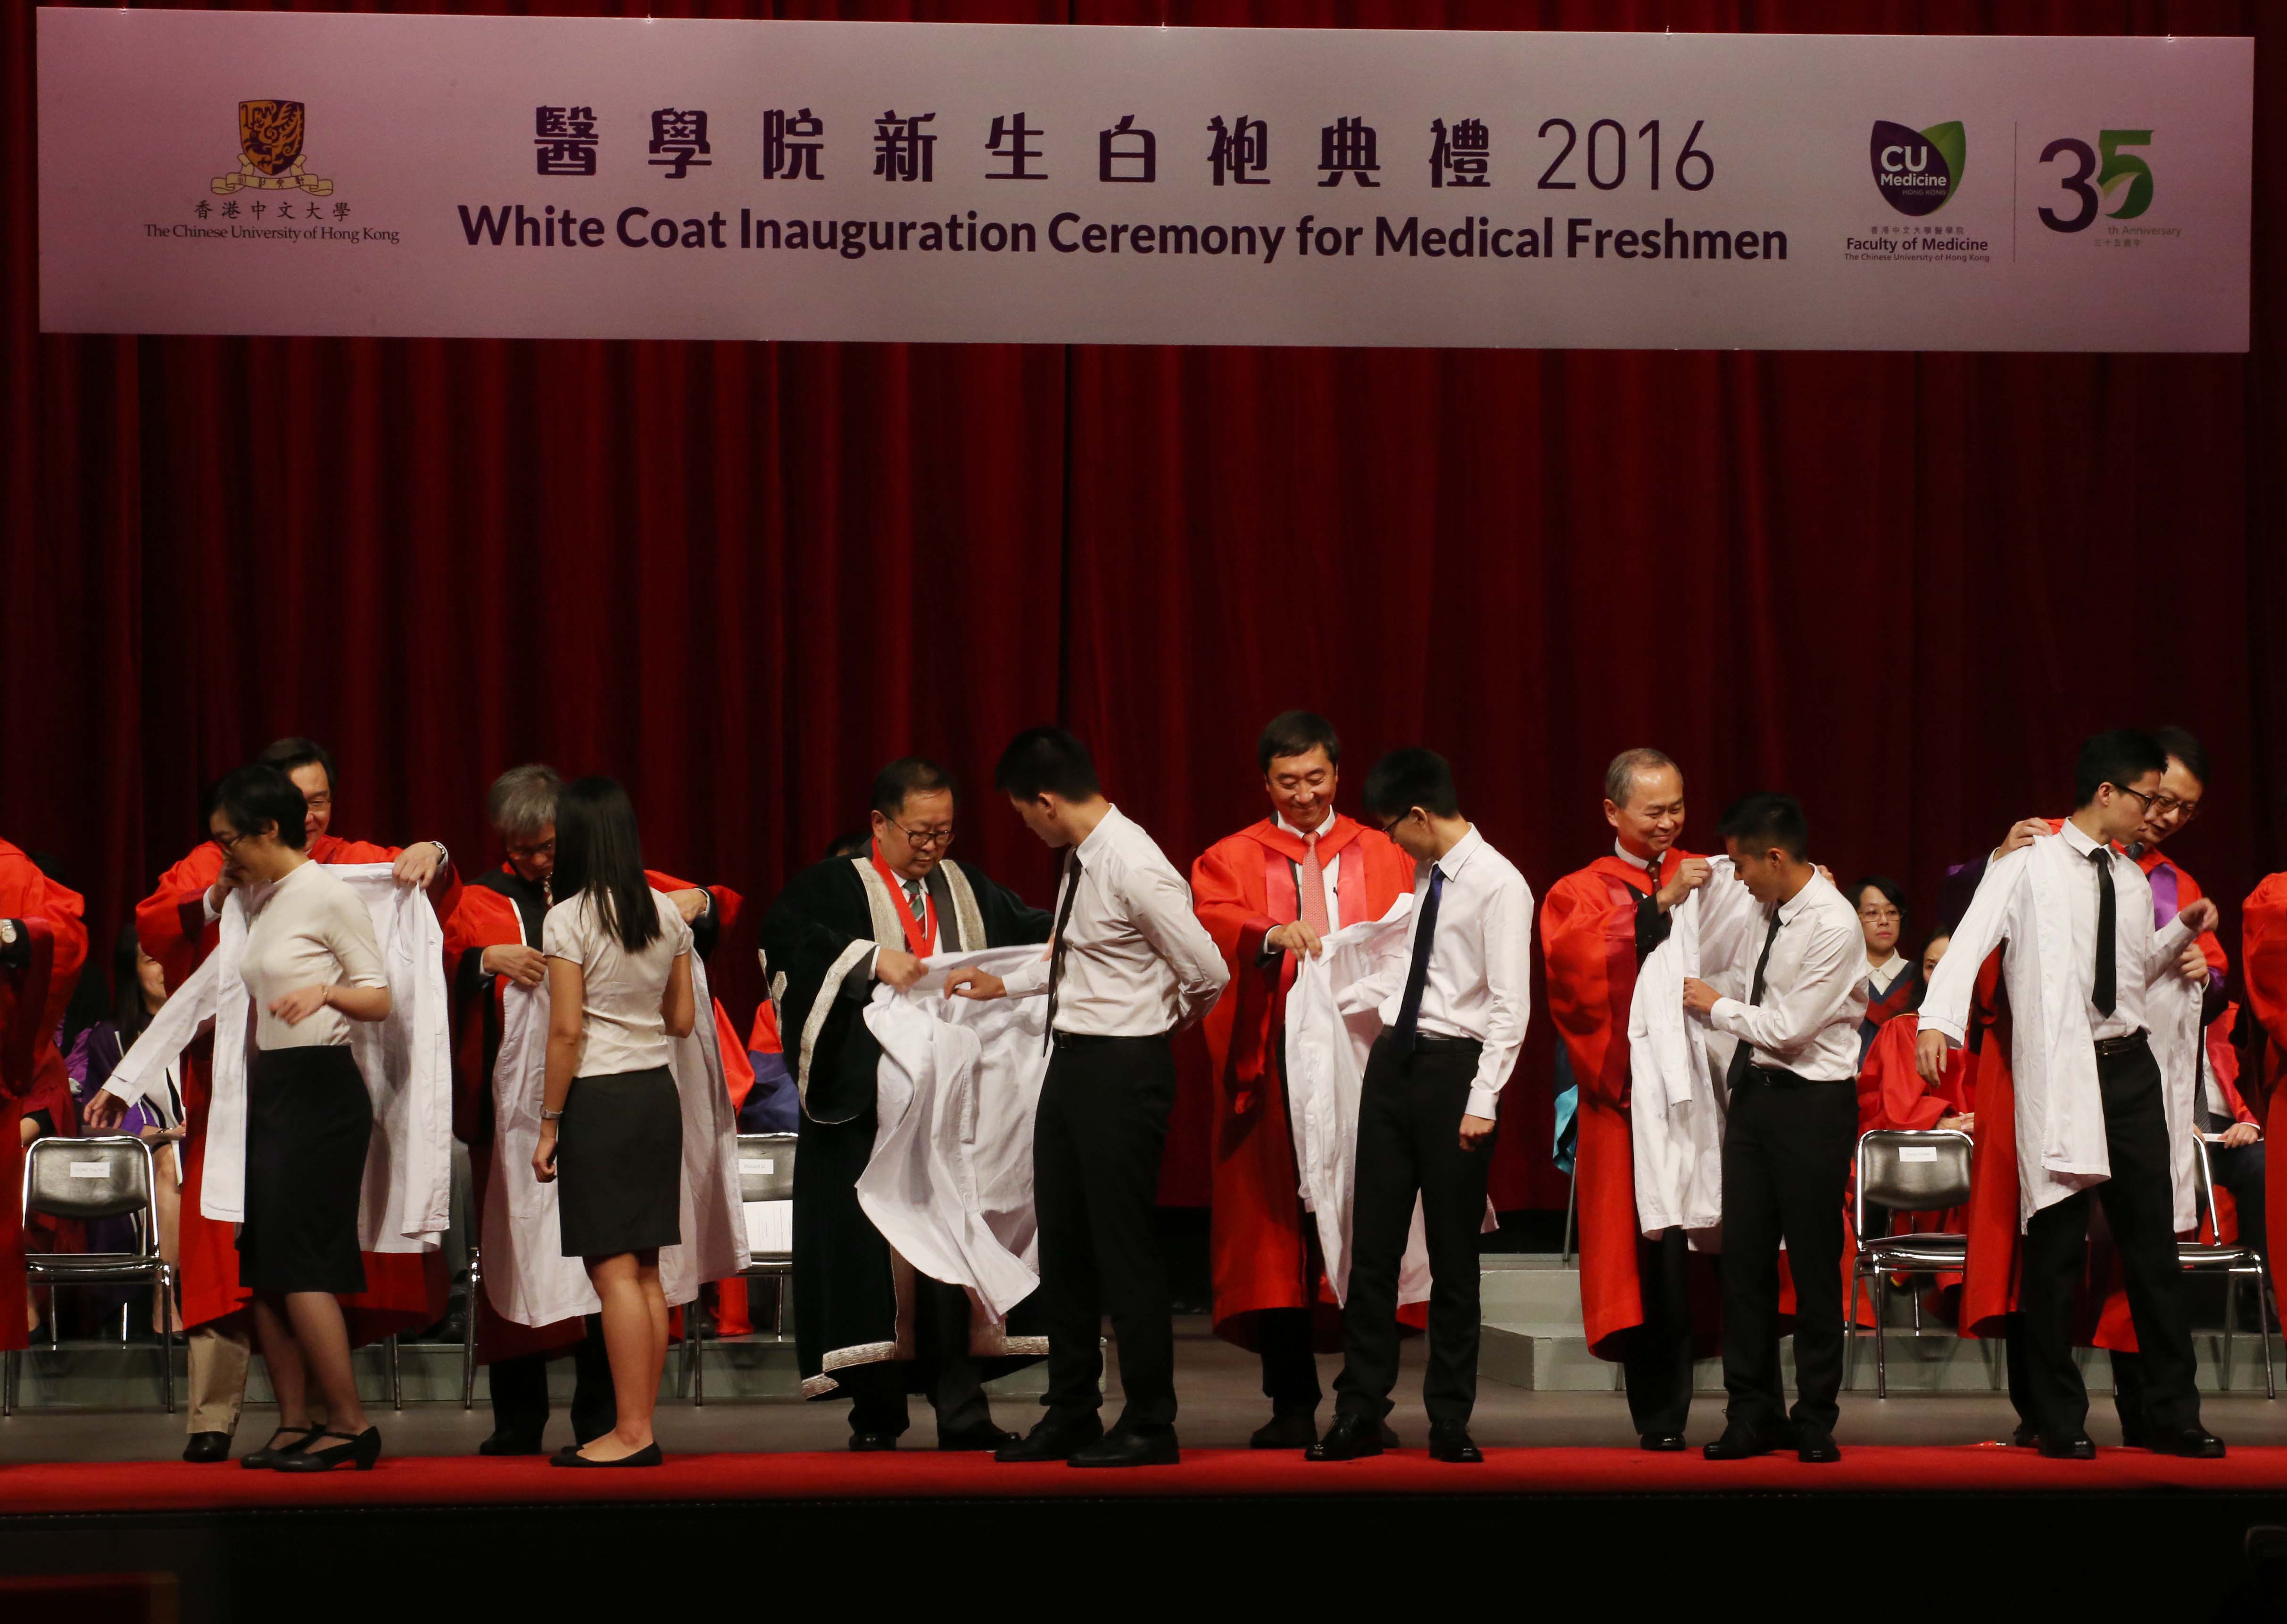 White coats are solemnly conferred on over 200 medical freshmen by Prof. Donald K. T. LI, President of the Hong Kong Academy of Medicine (3rd left, back row); Prof. Joseph SUNG, Vice-Chancellor of CUHK (3rd right, back row); Prof. FOK Tai-fai, Pro-Vice-Chancellor of CUHK (2nd right, back row); Dr HUNG Chi-tim, Cluster Chief Executive, New Territories East Cluster, Hospital Authority (2nd left, back row); and Prof. Francis CHAN, Dean of the Faculty of Medicine, CUHK (1st right, back row) and Prof. WING Yun-kwok, Associate Dean (Student Affairs) of the Faculty (1st left, back row) in the White Coat Inauguration Ceremony 2016.